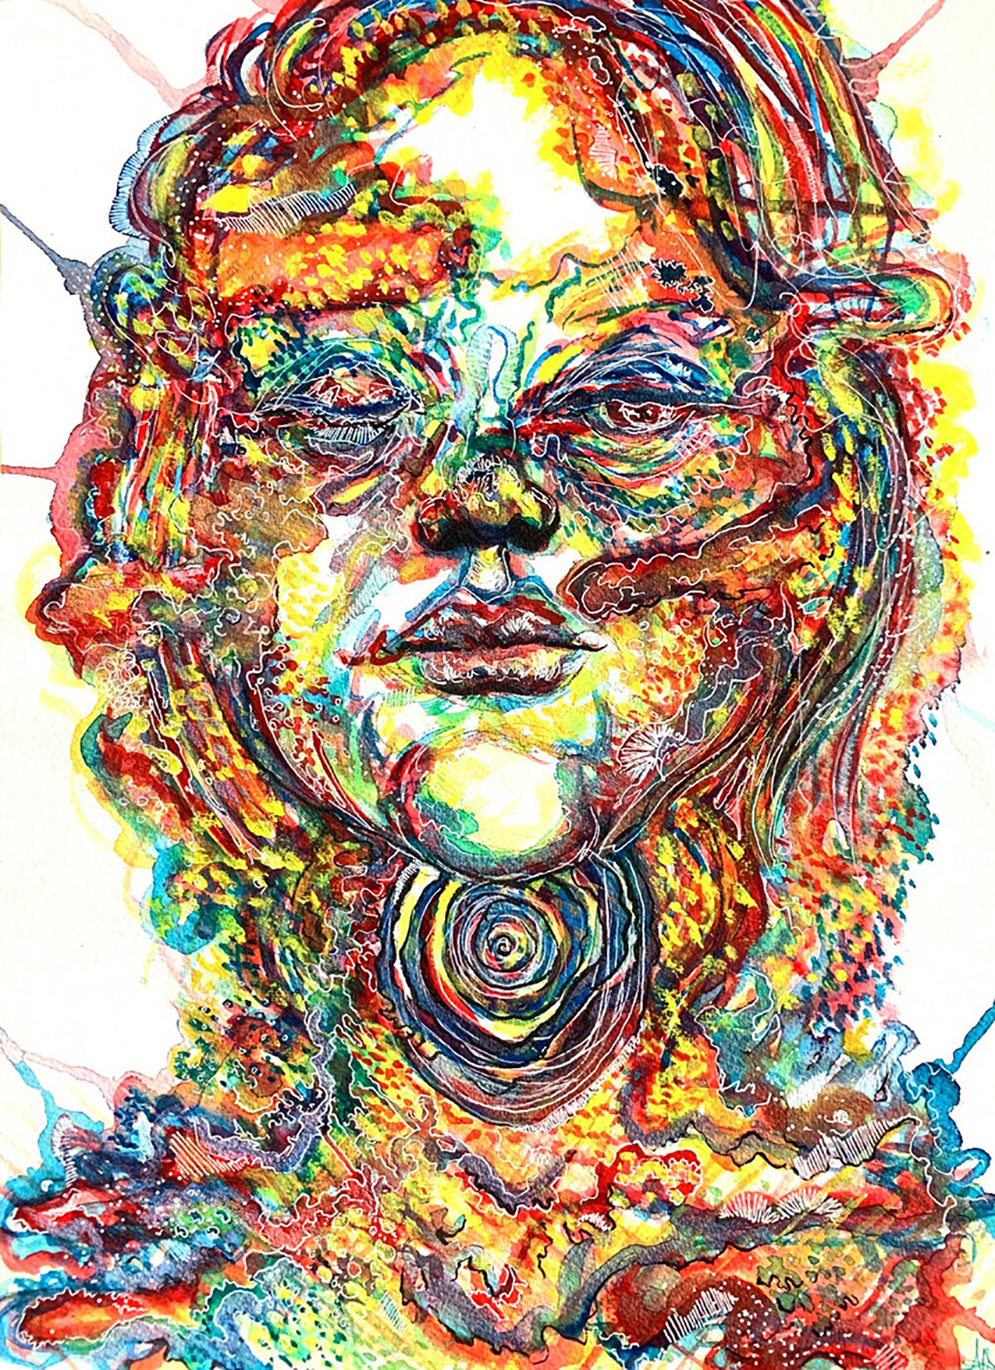 A watercolor painting using mainly red, yellow, and blue paint. It is the face of the artist made out of paint splatters, thin white lines, and splotches of red, blue, and yellow paint. The face and neck are disconnected and there is a blue spiral on the top of the neck. The left eye of the person is close and the right one is half open. Paint splatters move off of the frame of the painting.